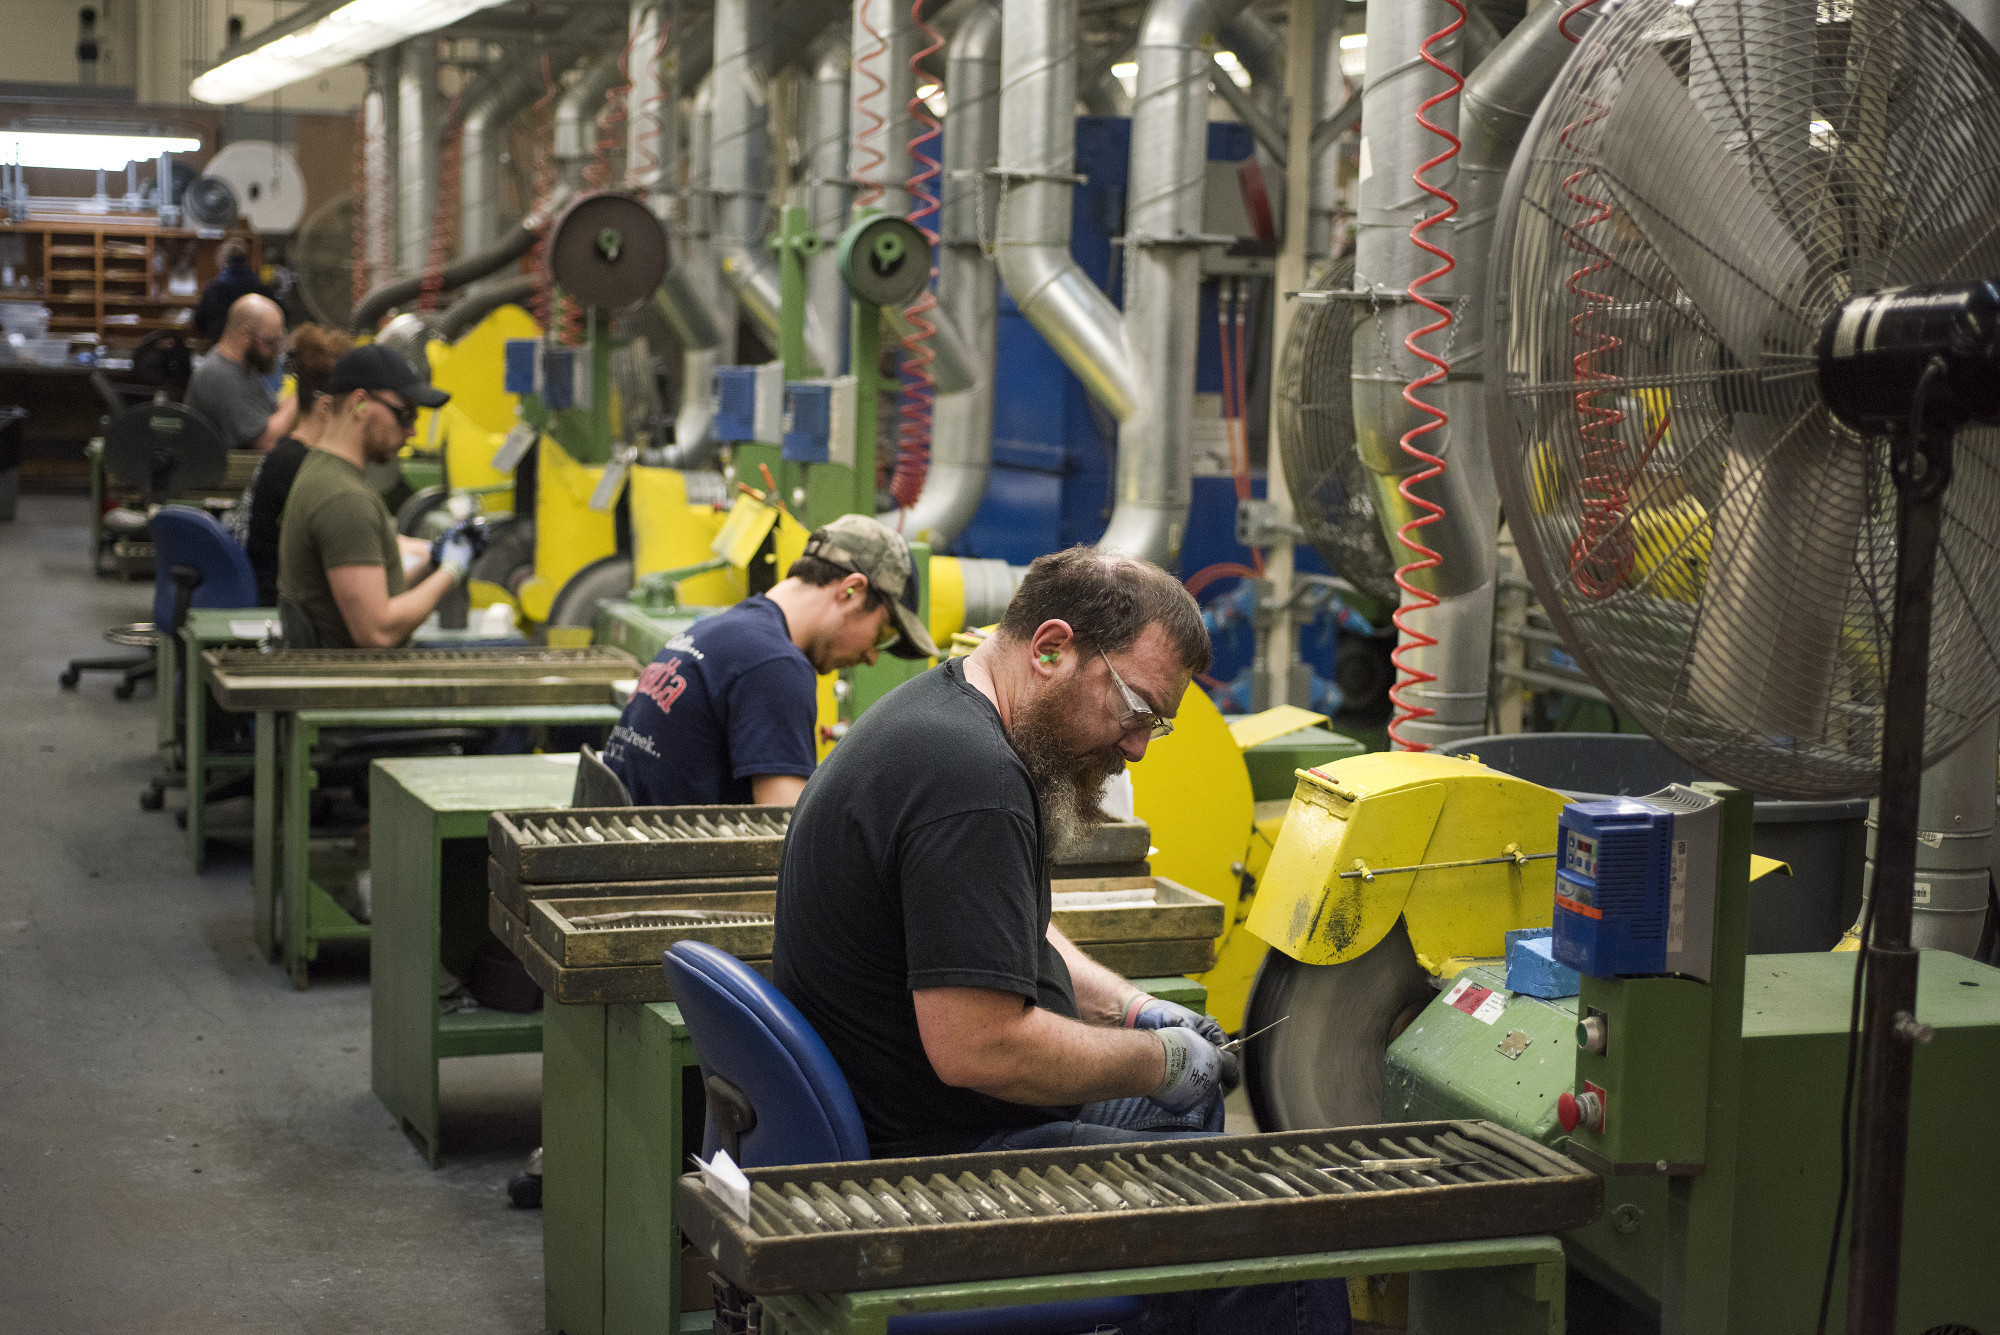 Operations Inside W.R. Case & Sons Cutlery Co. Manufacturing Facility Ahead Of Factory Orders 